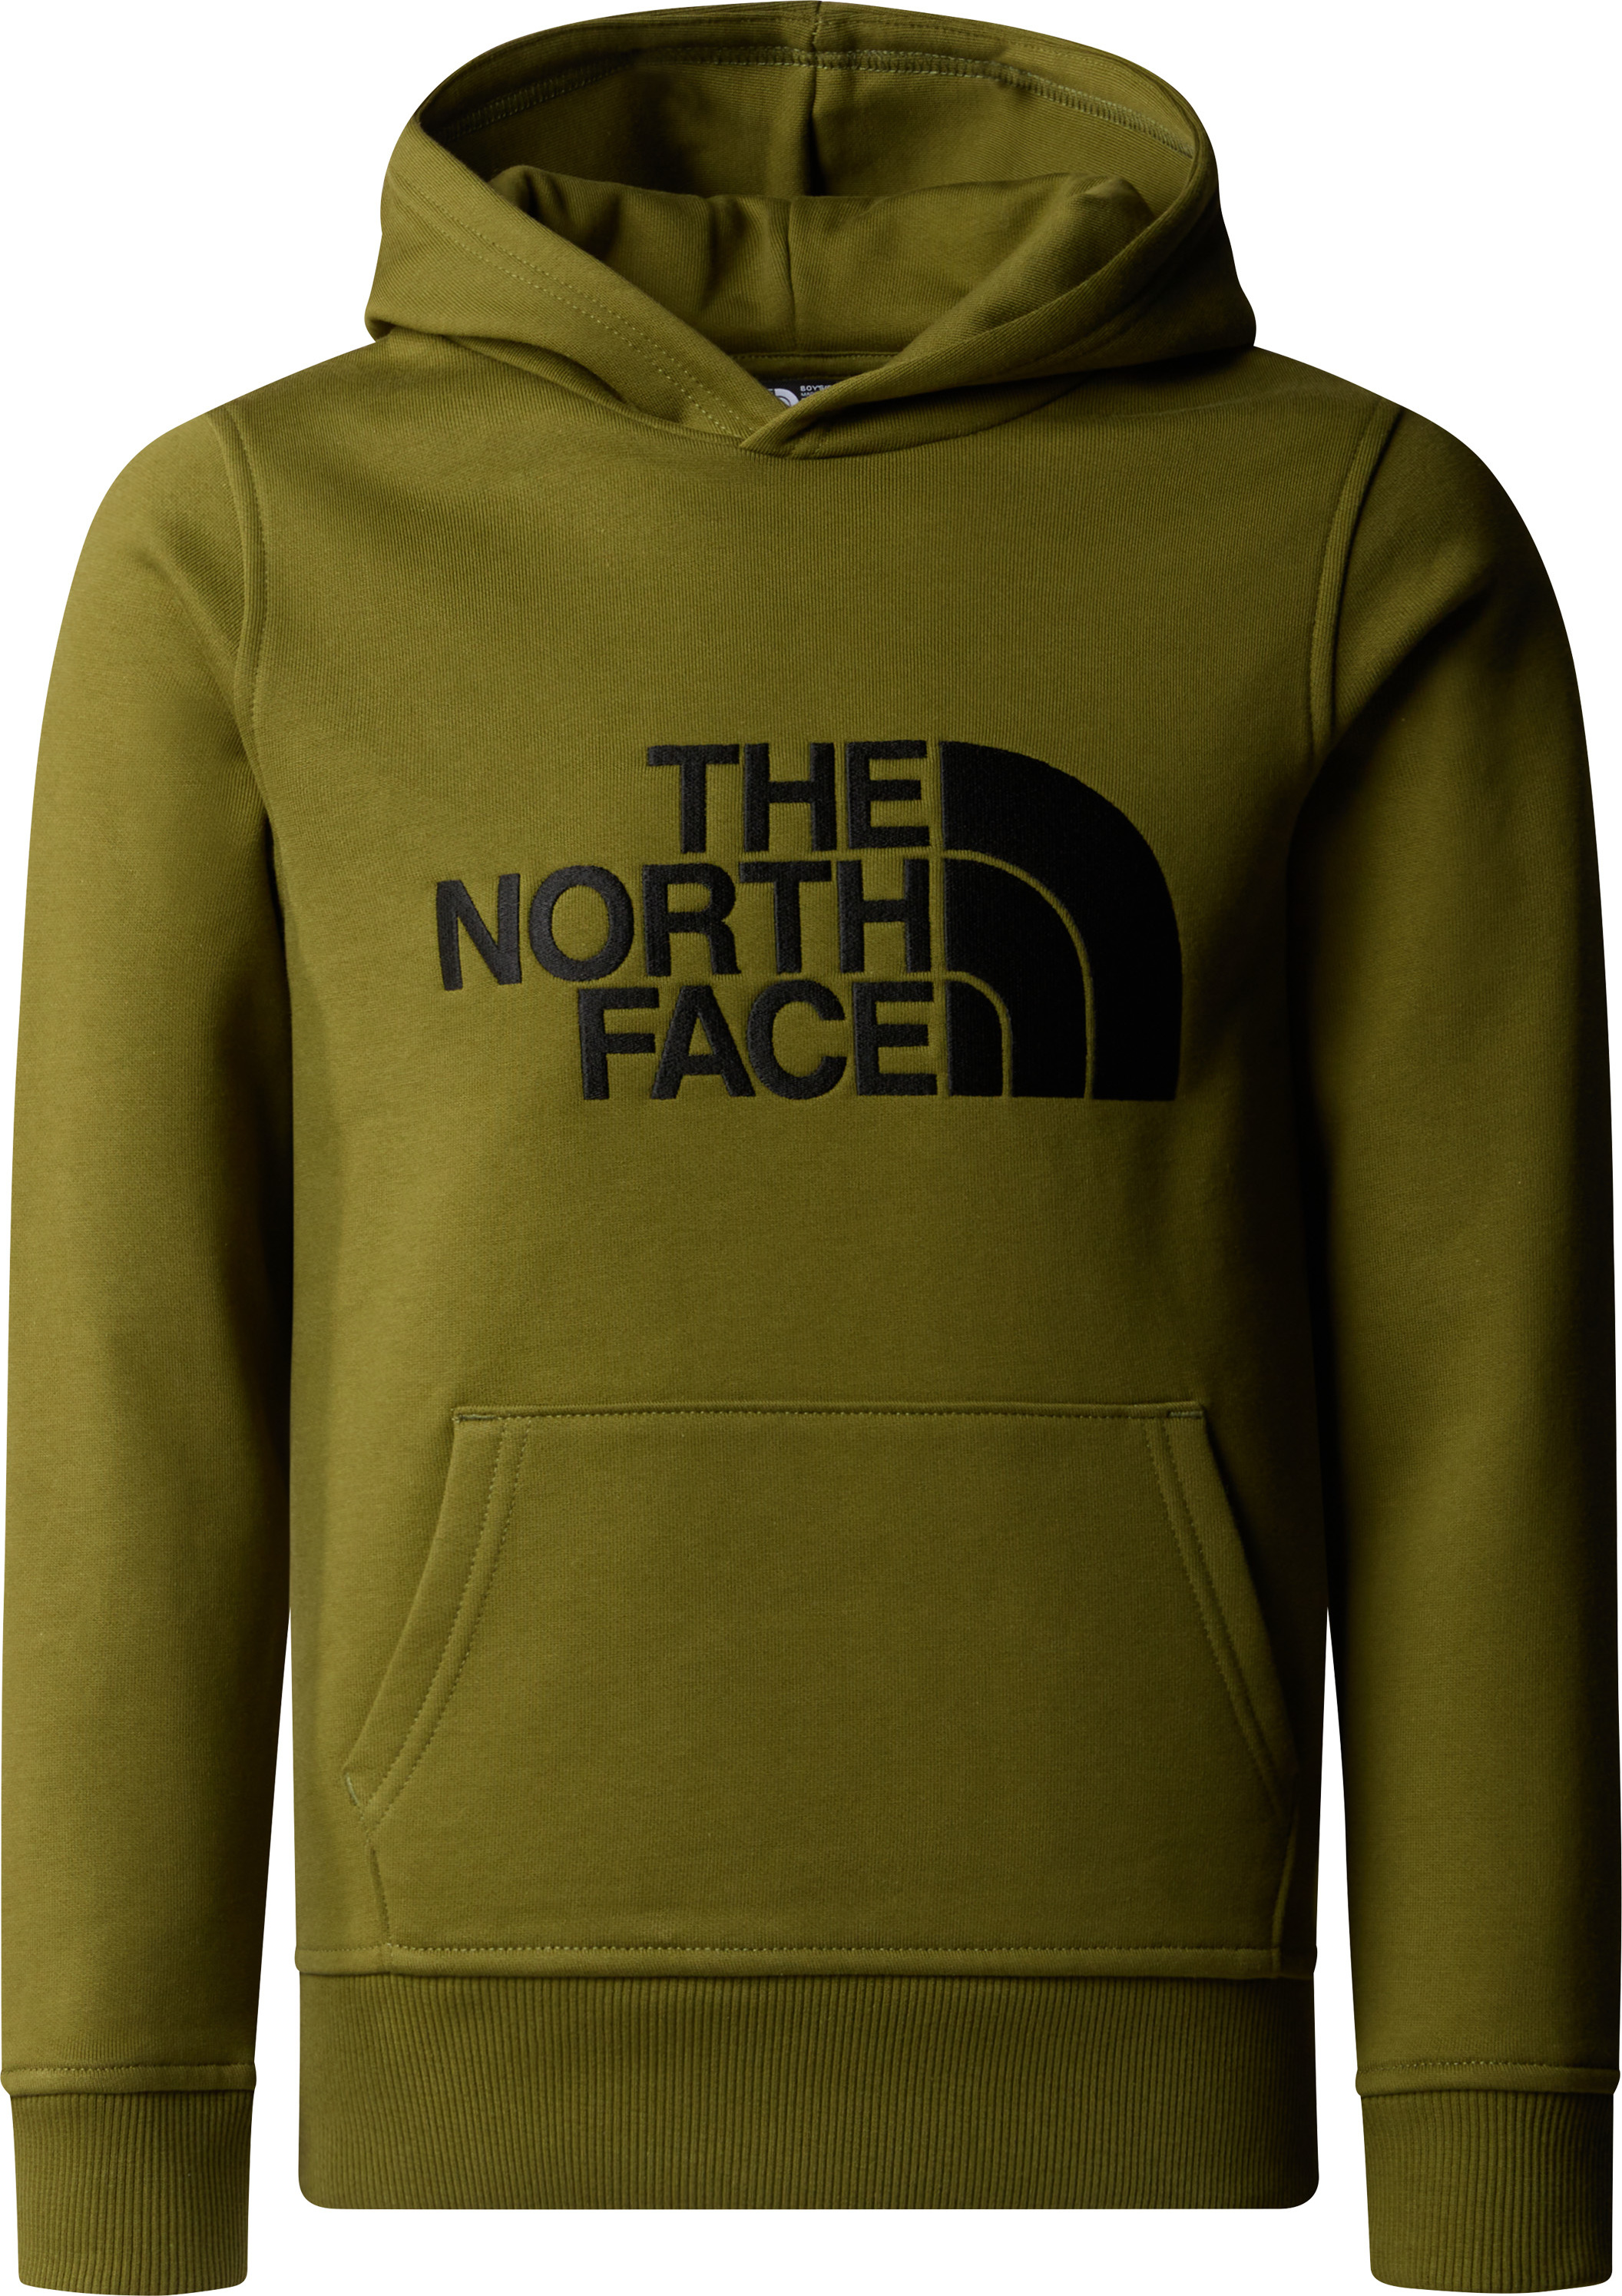 The North Face The North Face B Drew Peak P/O Hoodie Forest Olive L, Forest Olive